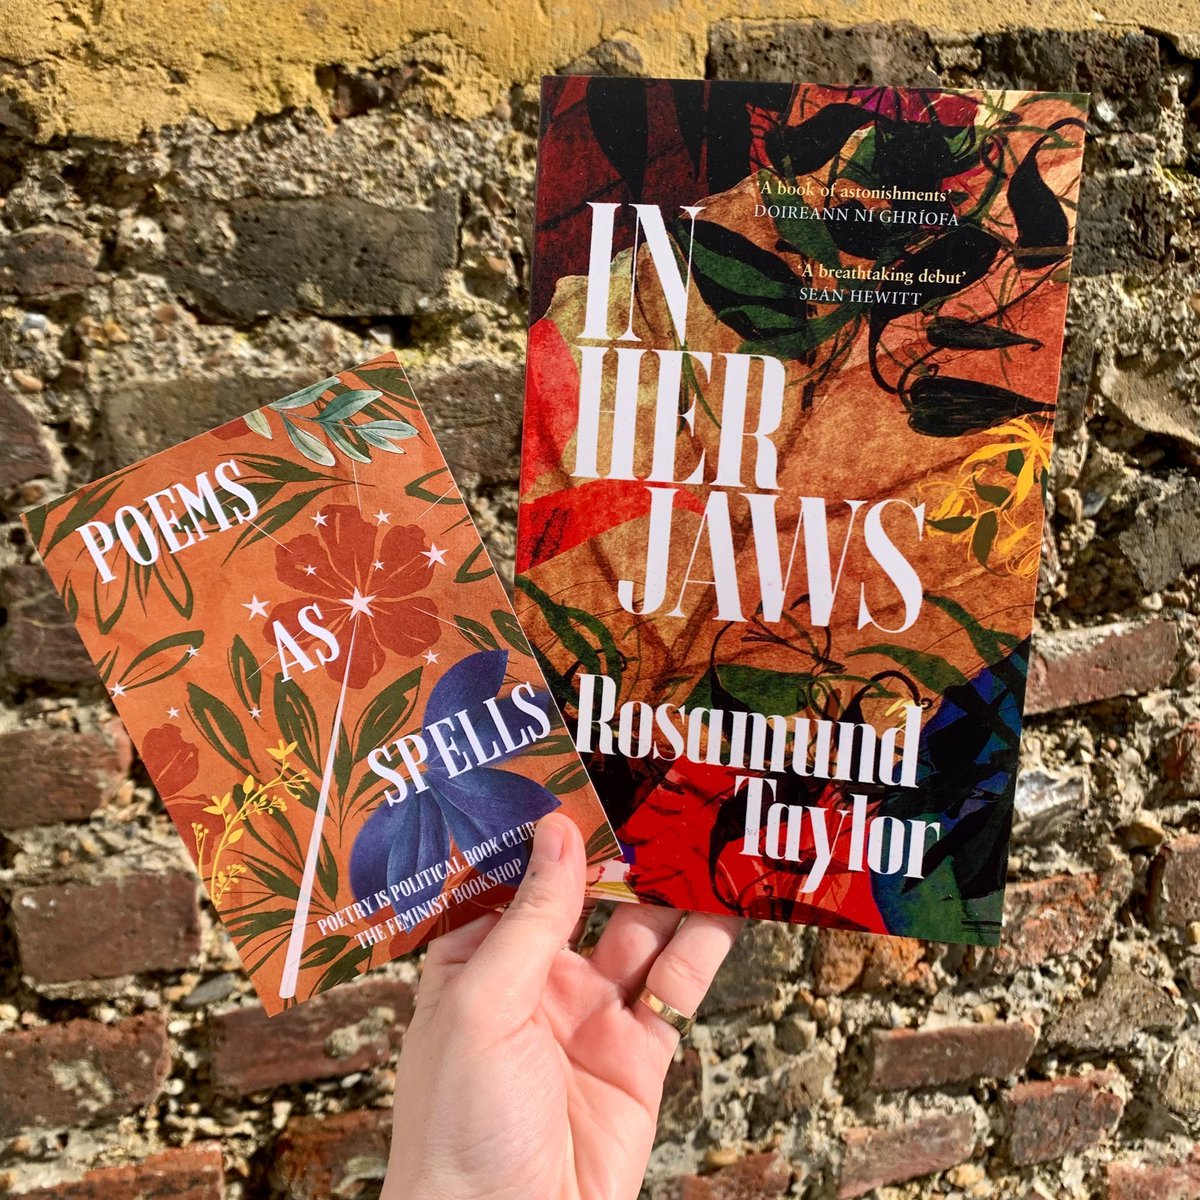 For the next Poetry is Political Bookclub, we wanted to discuss queer love, witches and nature. In Her Jaws by @RosamundTaylor is an astonishing debut collection on reimagined history, the Irish lyric tradition of writing the female perspective, and reclamation of language.